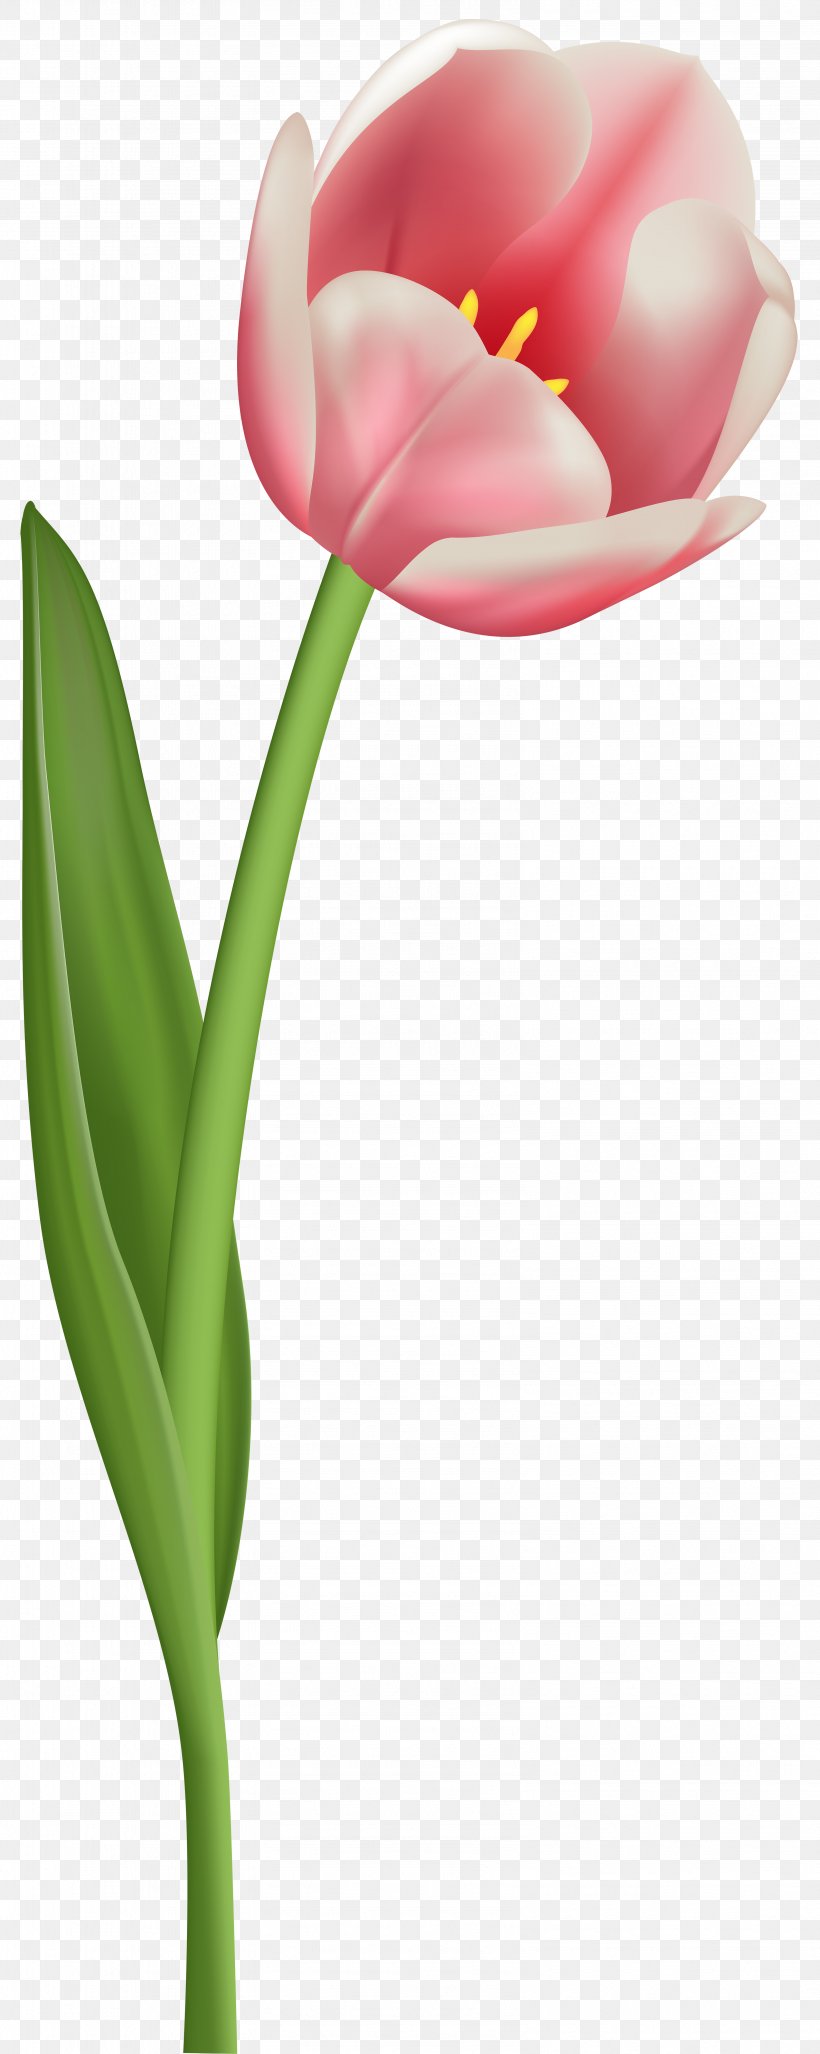 Tulip Mania Flower Clip Art, PNG, 3193x8000px, Tulip Mania, Bud, Color, Cut Flowers, Flower Download Free